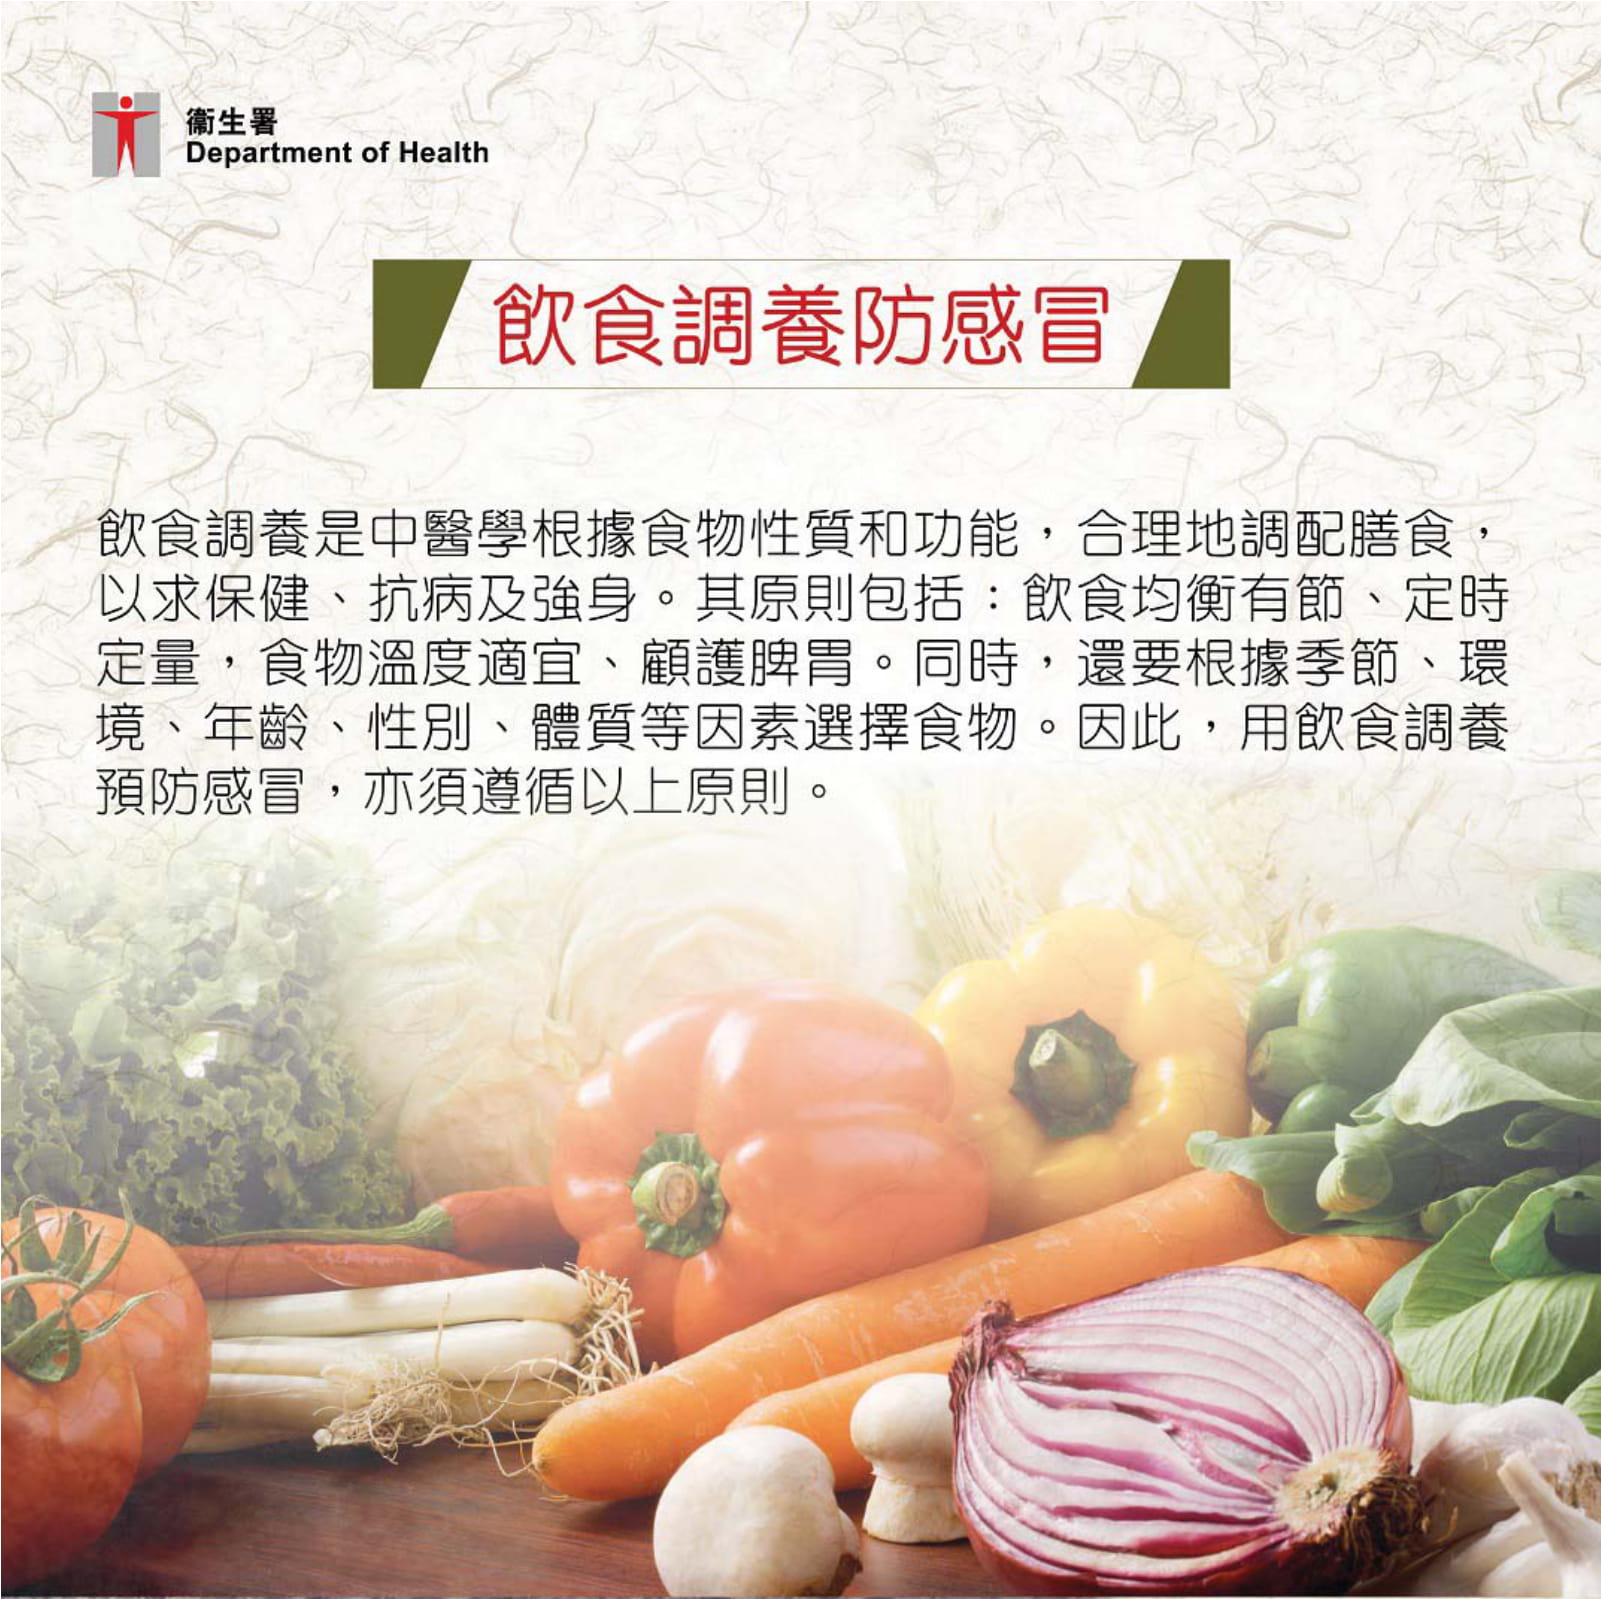 Prevention of Colds by Food (Chinese version only)